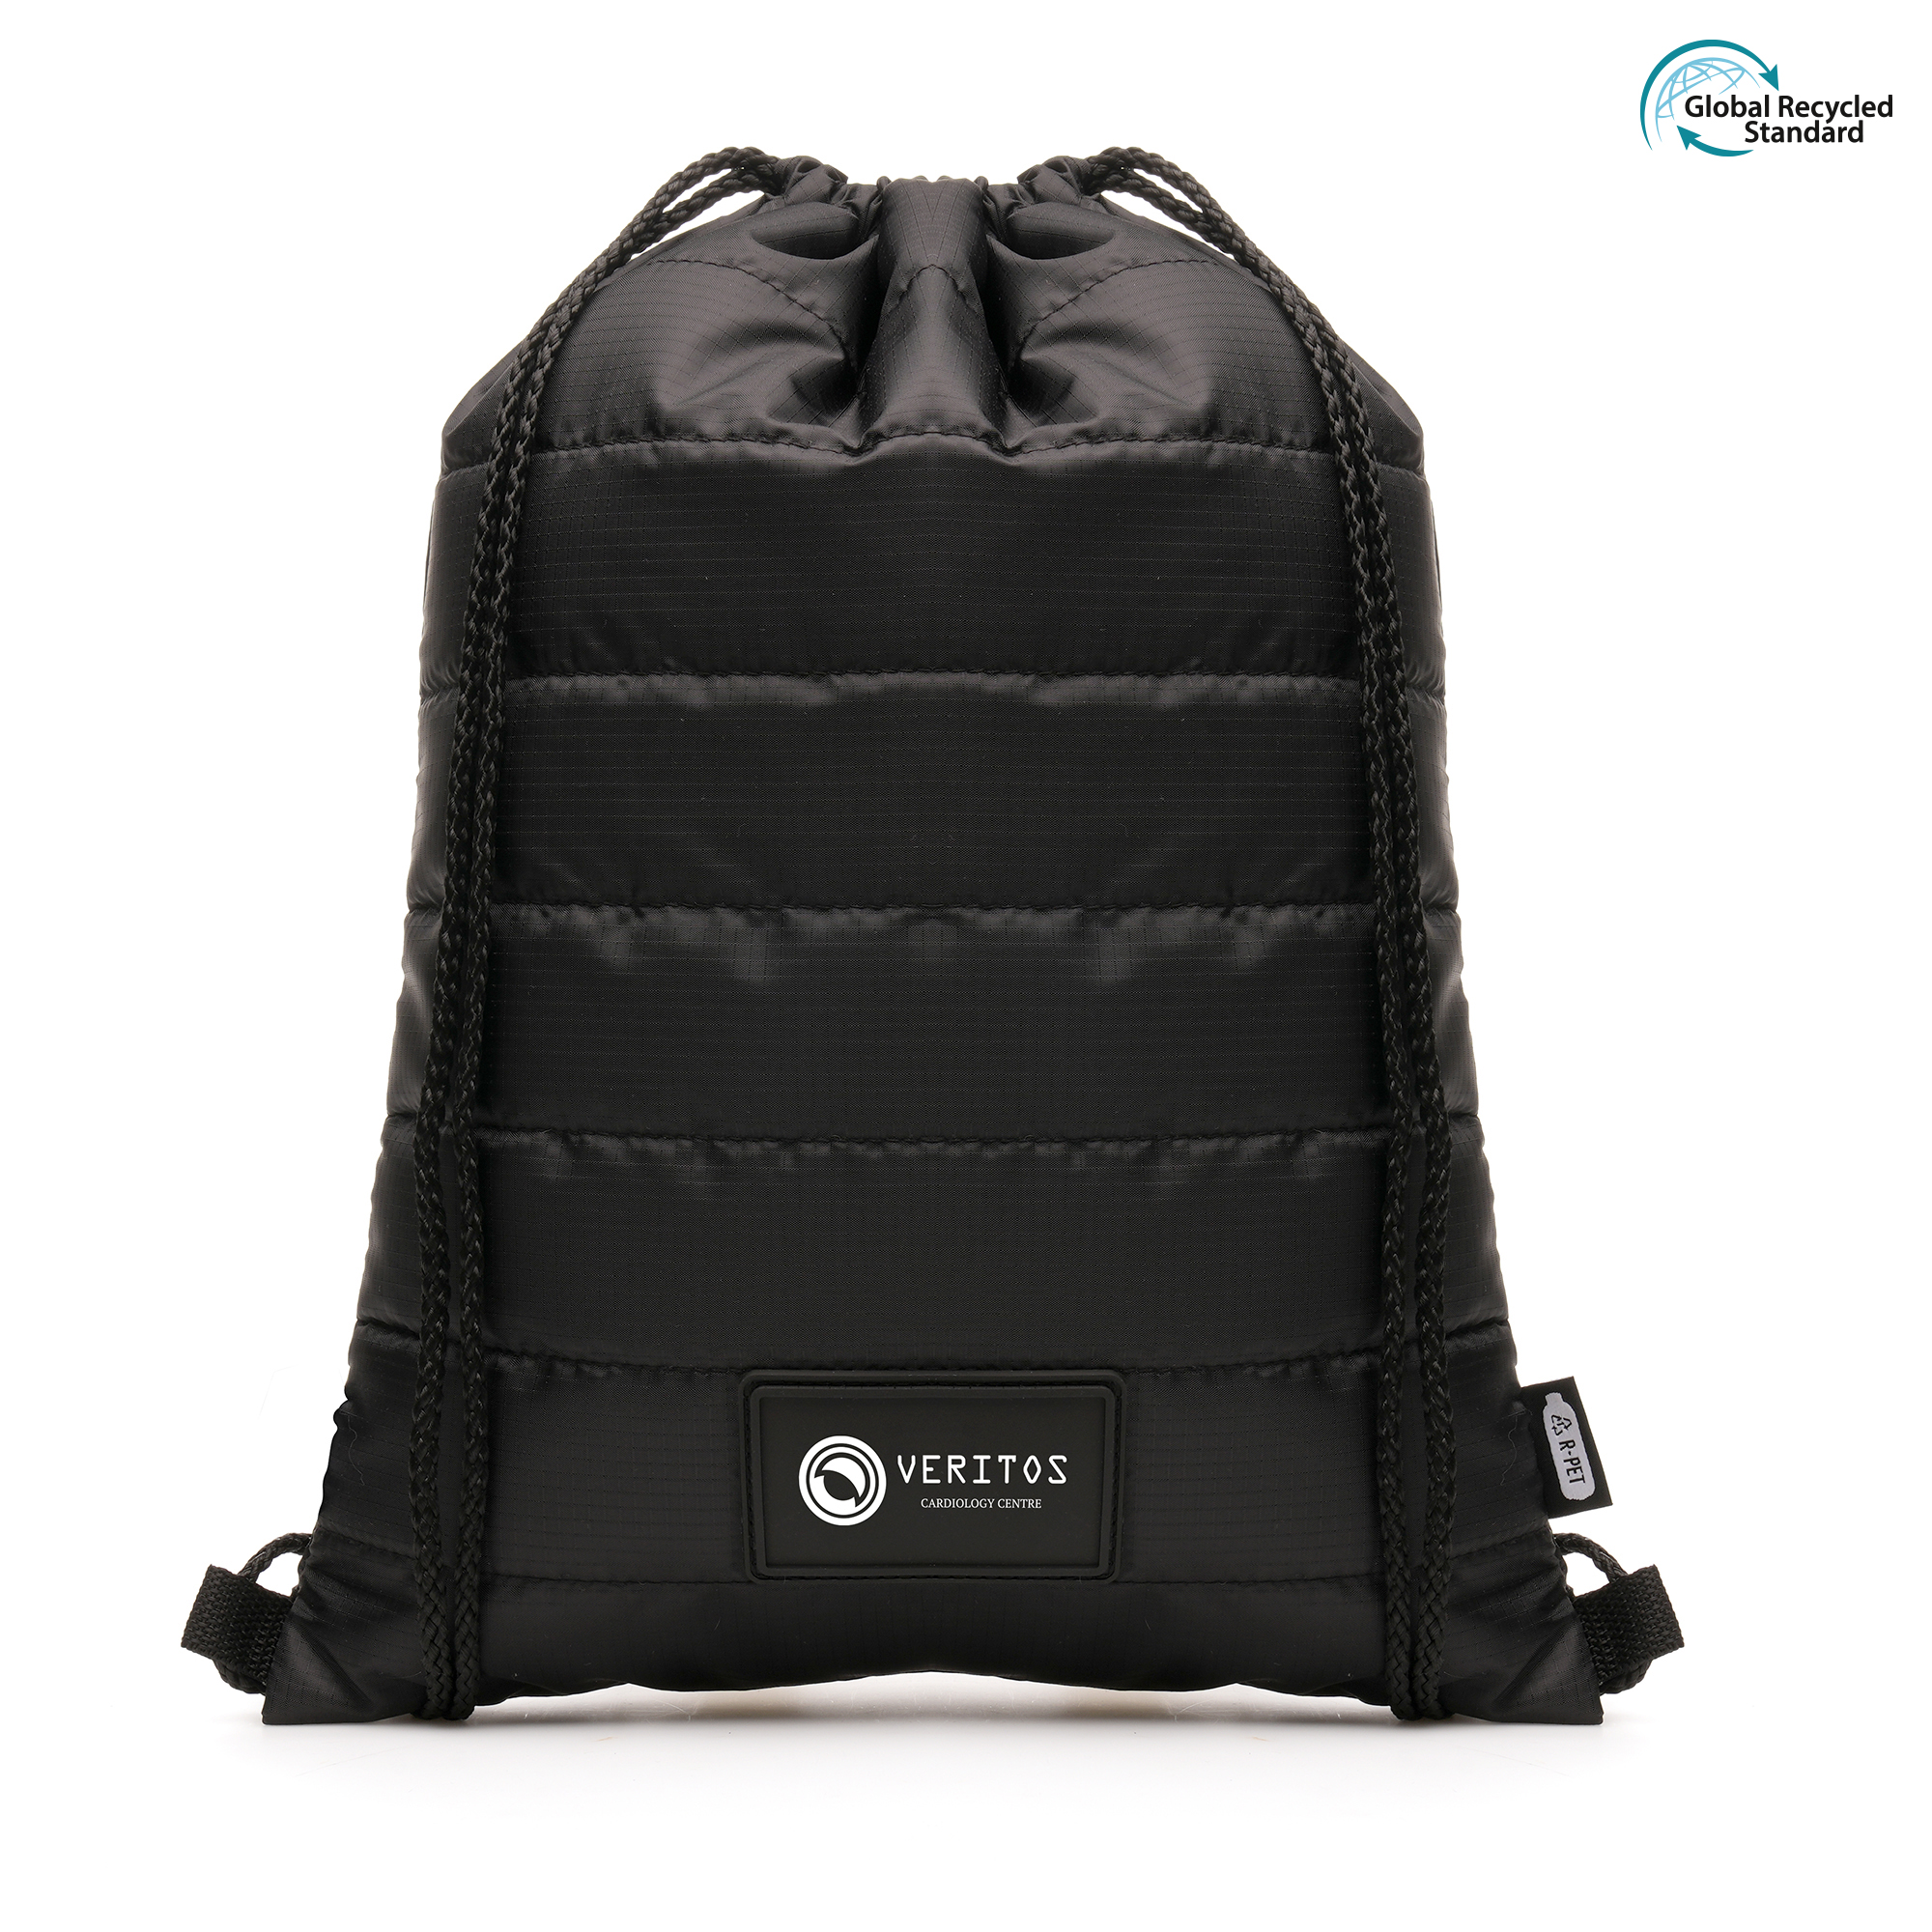 RPET polyester puffer drawstring bag with polyester rope shoulder straps and a faux leather patch stitched to the front for your company logo.